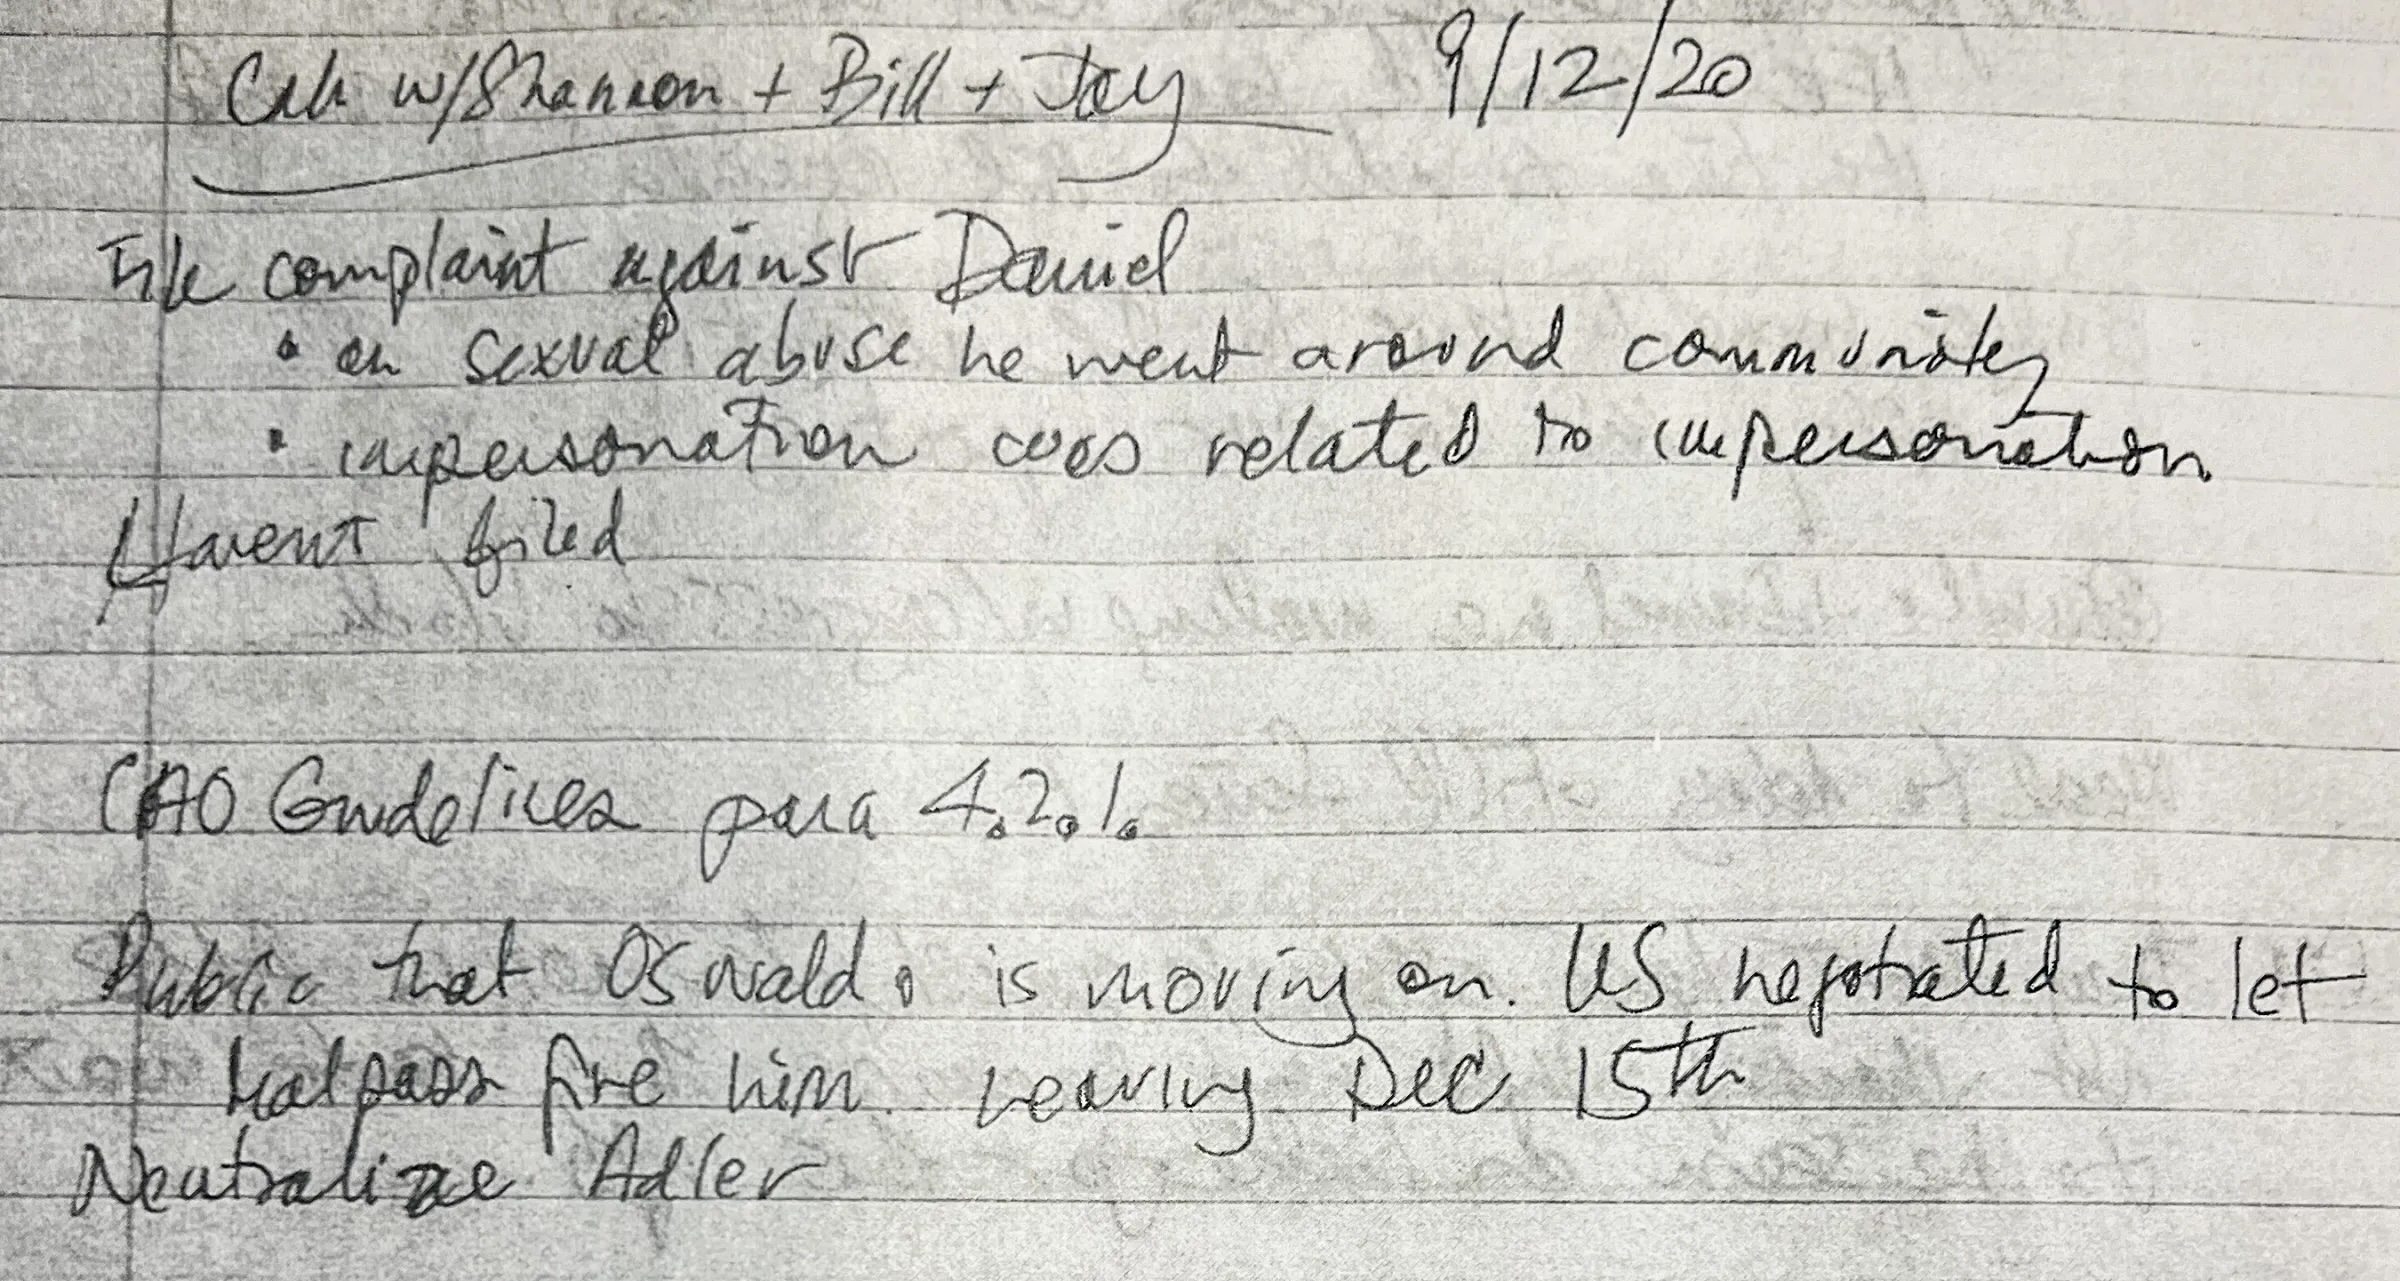 Image of notes from an IFC staff member and Bridge founders about the scandal and the whistleblower, from the Intercept